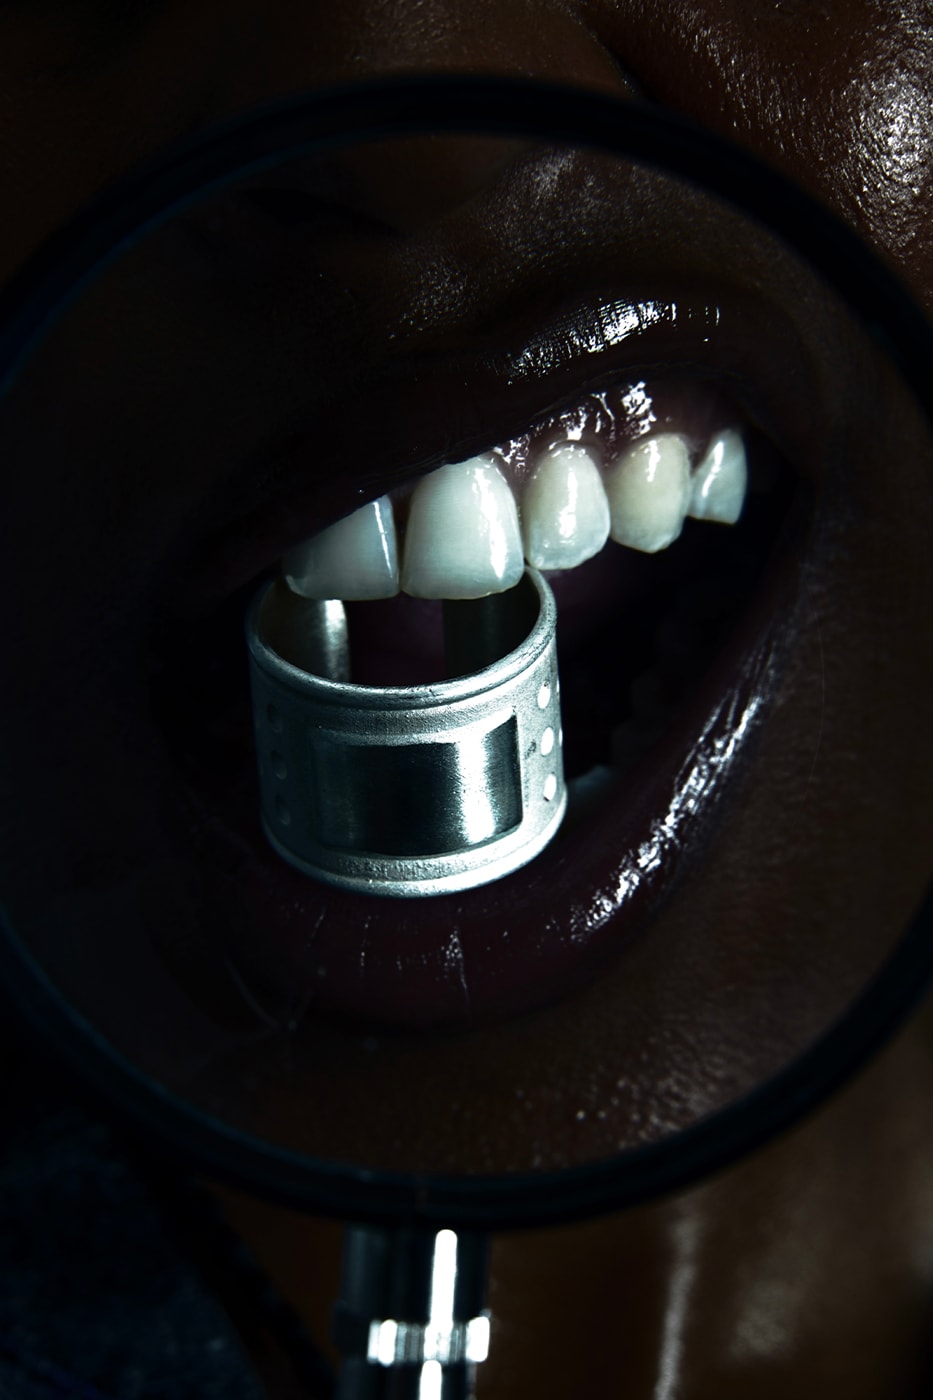 Domenico Formichetti's PDF Releases the "BEND" Silver Ring inspired by one ring dark lord sauron lord of the rings 925 sterling silver accessories jewelry 